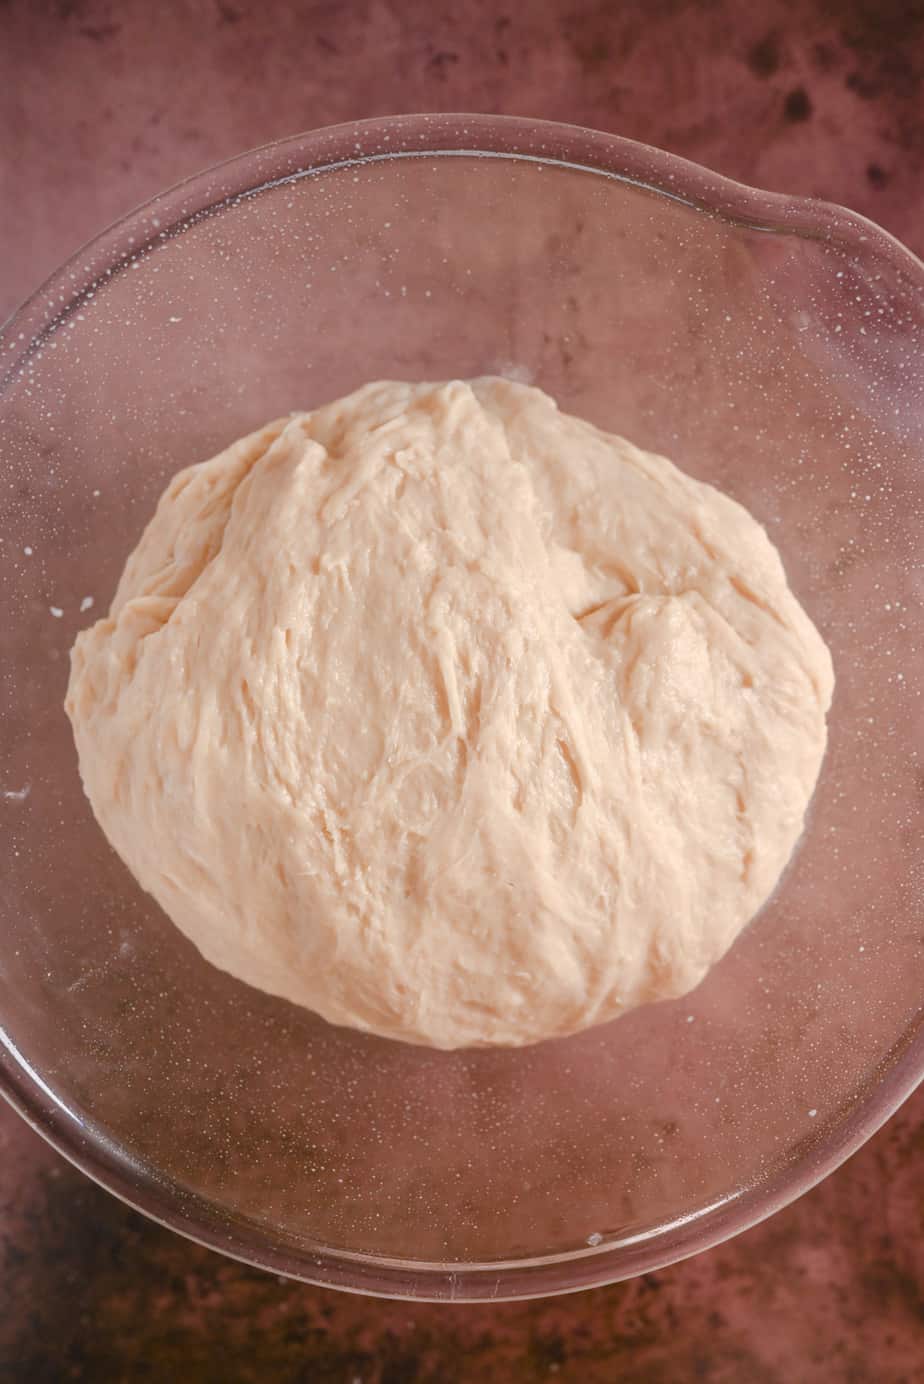 Kneaded paska dough in a greased glass mixing bowl